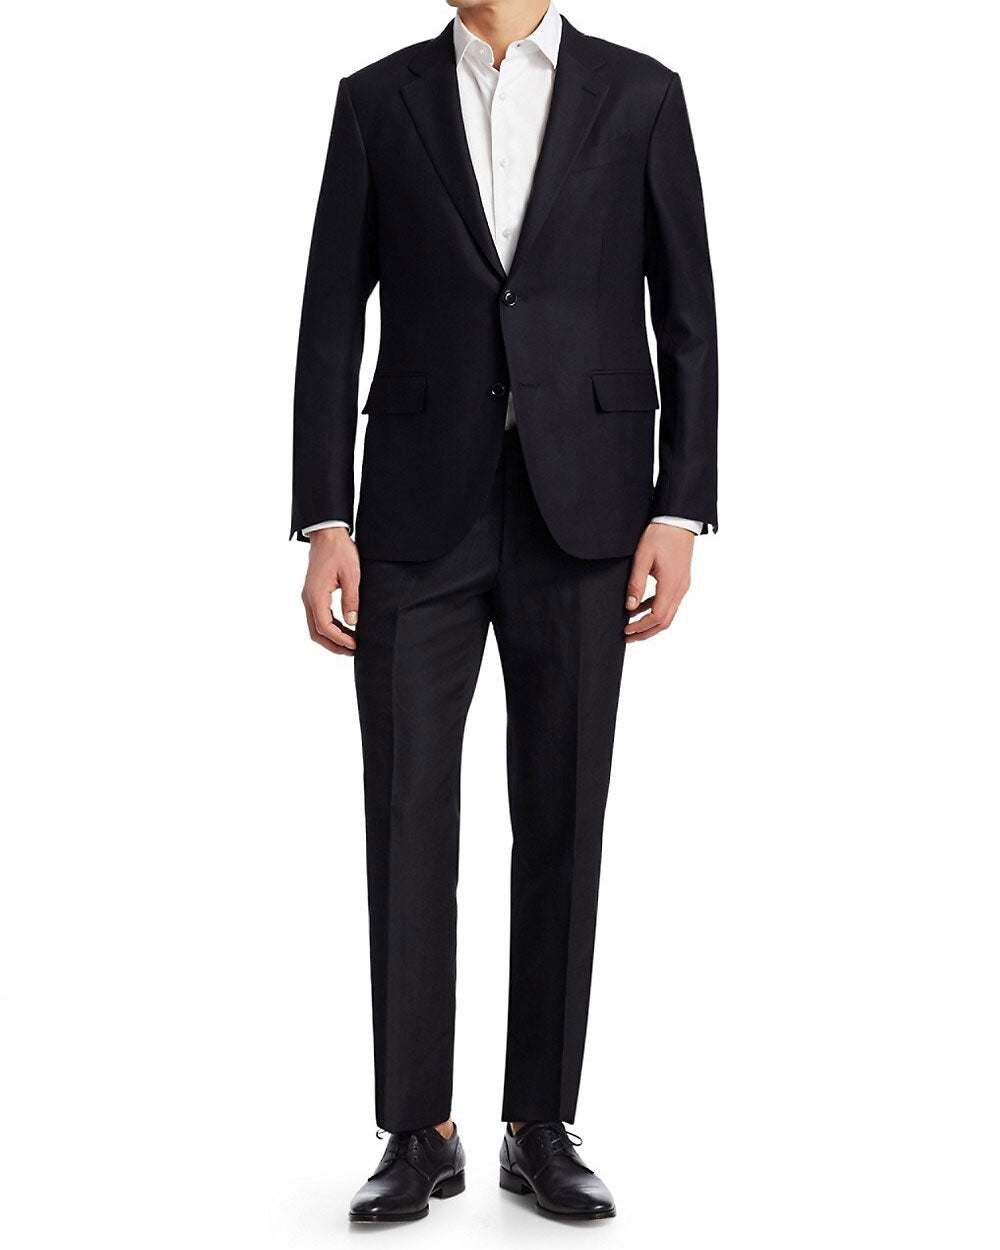 Oxxford Clothes Navy Suit